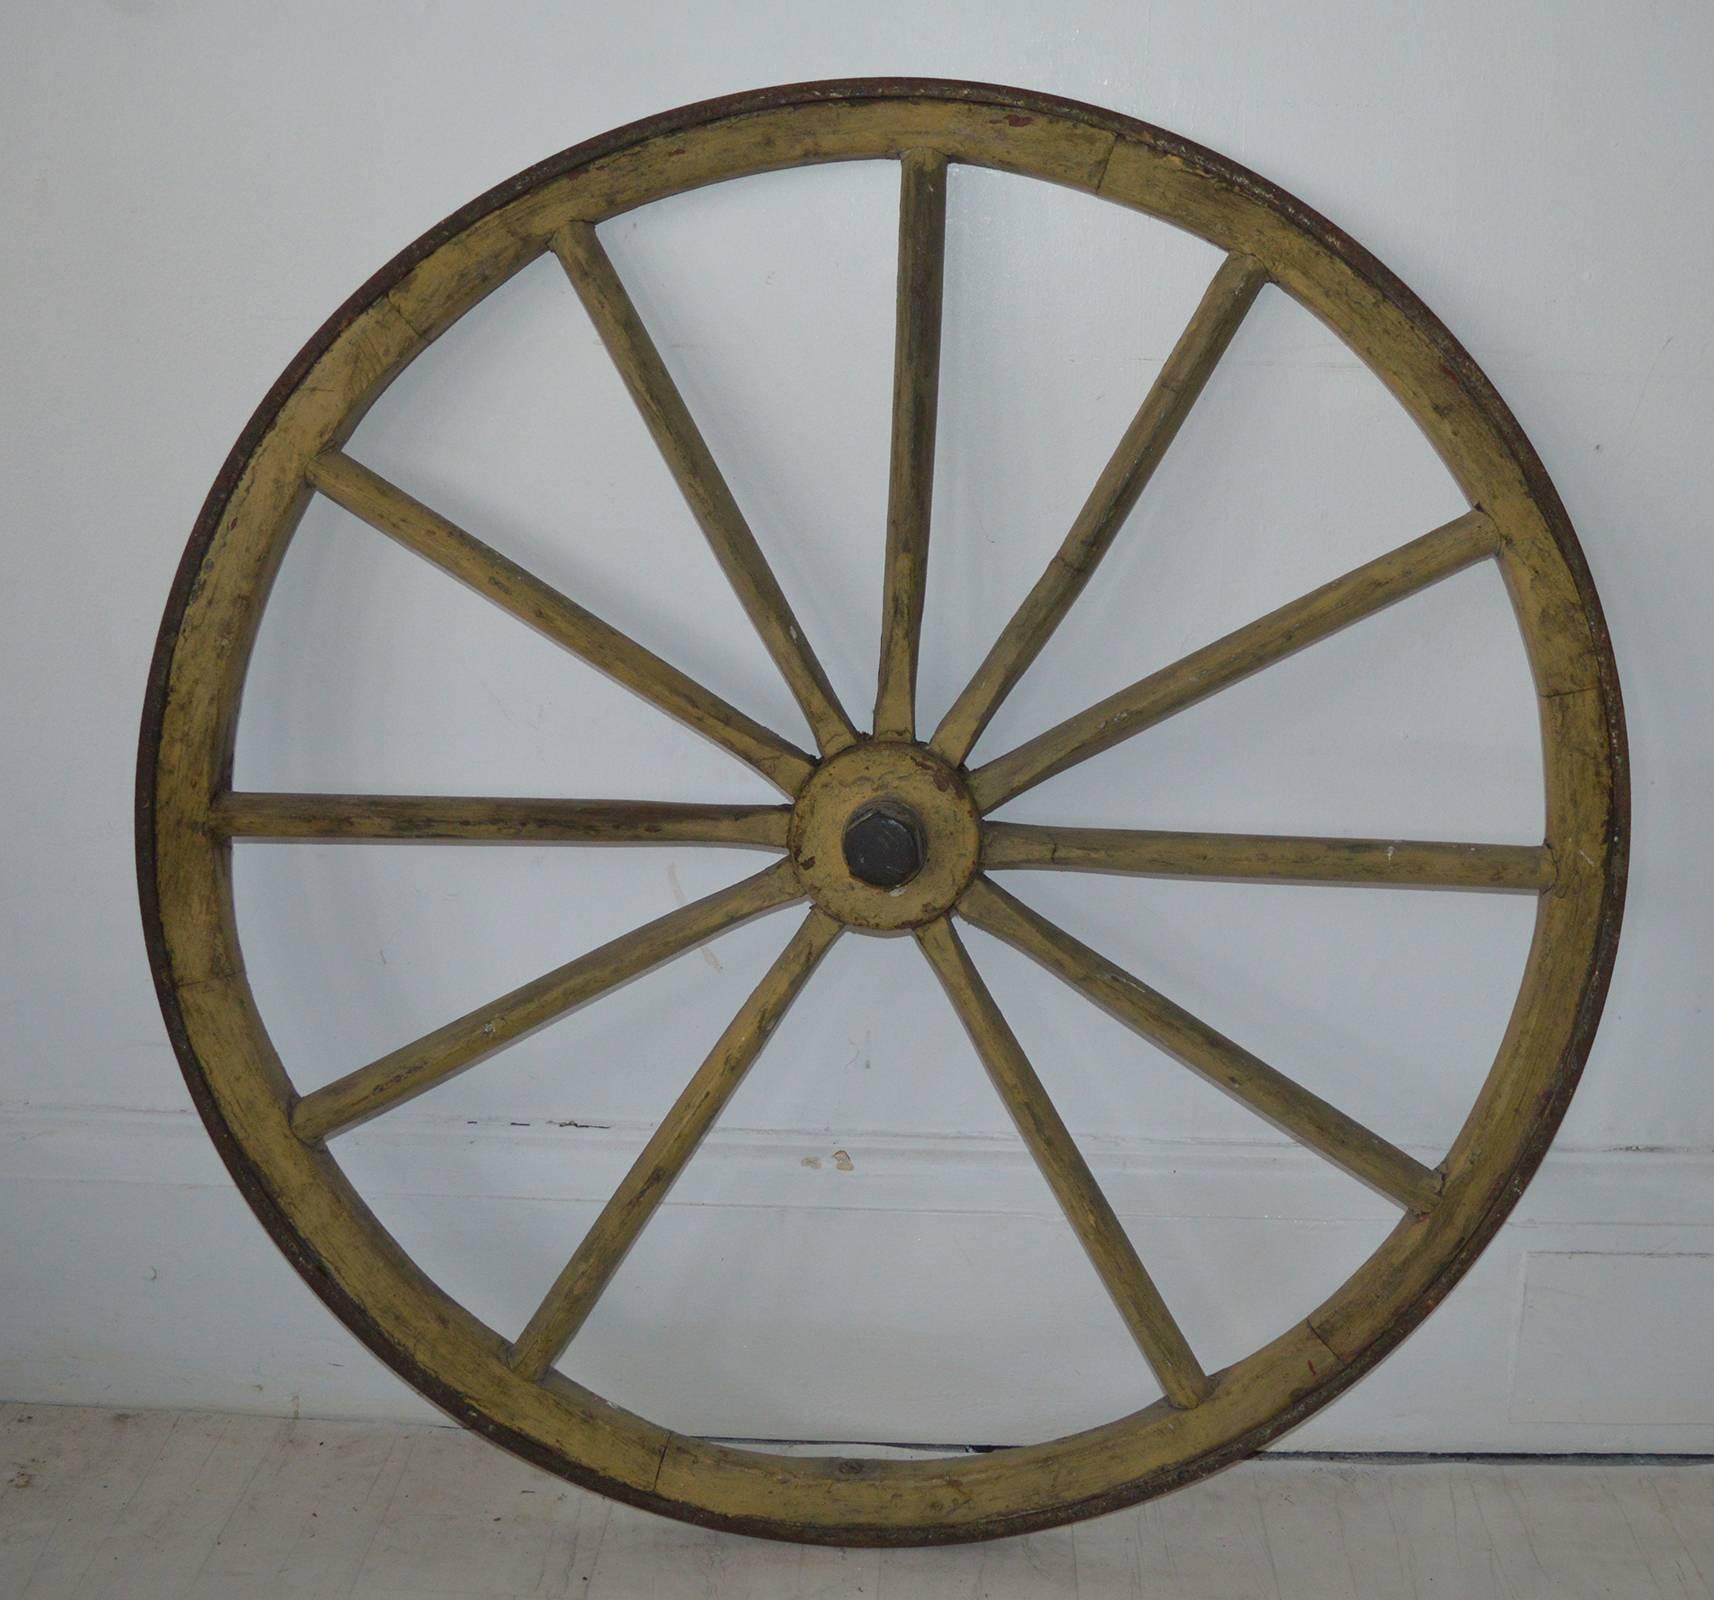 Great piece of Folk Art.

Painted wood with an iron band on the outer rim.

Beautiful color of pale yellow. "The color to die for".

Would look great mounted on a wall or even just rest against a wall.

One of the spokes is